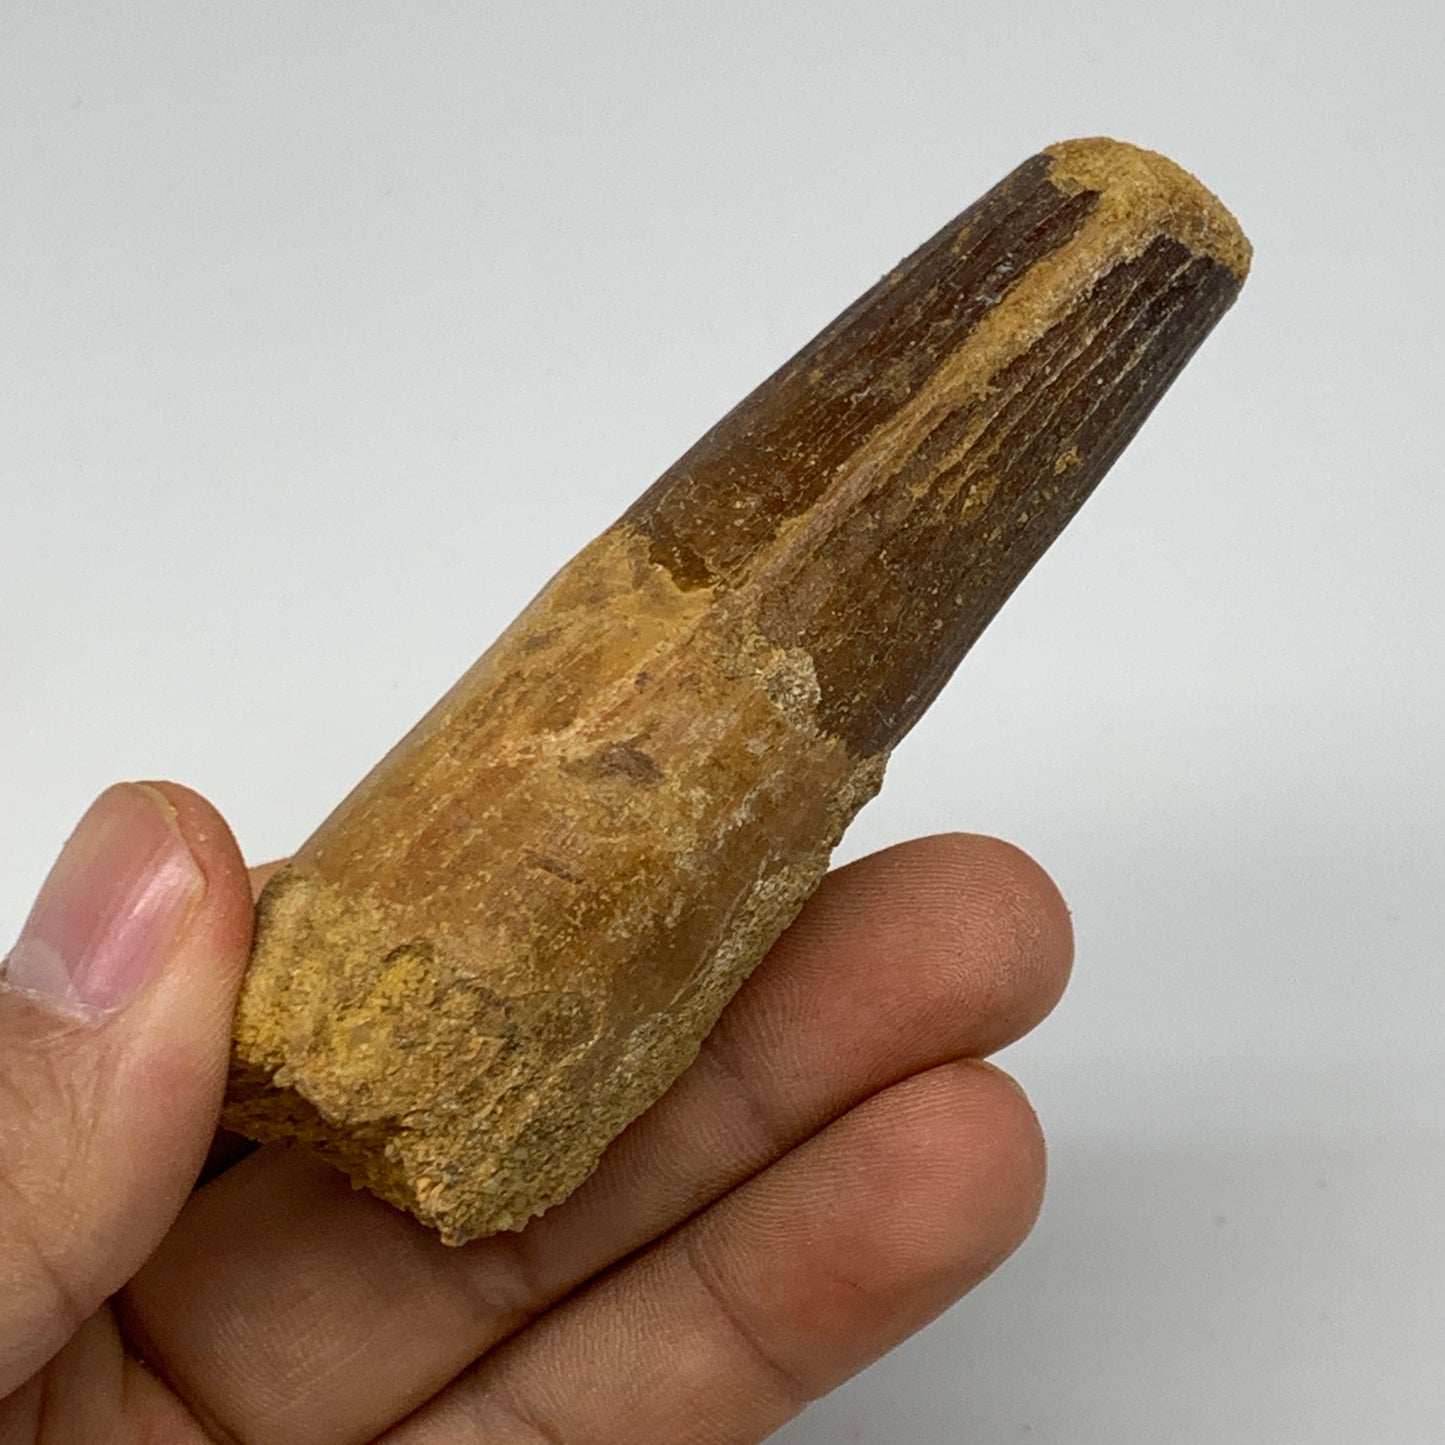 78.8g, 3.4"X1.3"x 1", Rare Natural Fossils Spinosaurus Tooth from Morocco, F3261